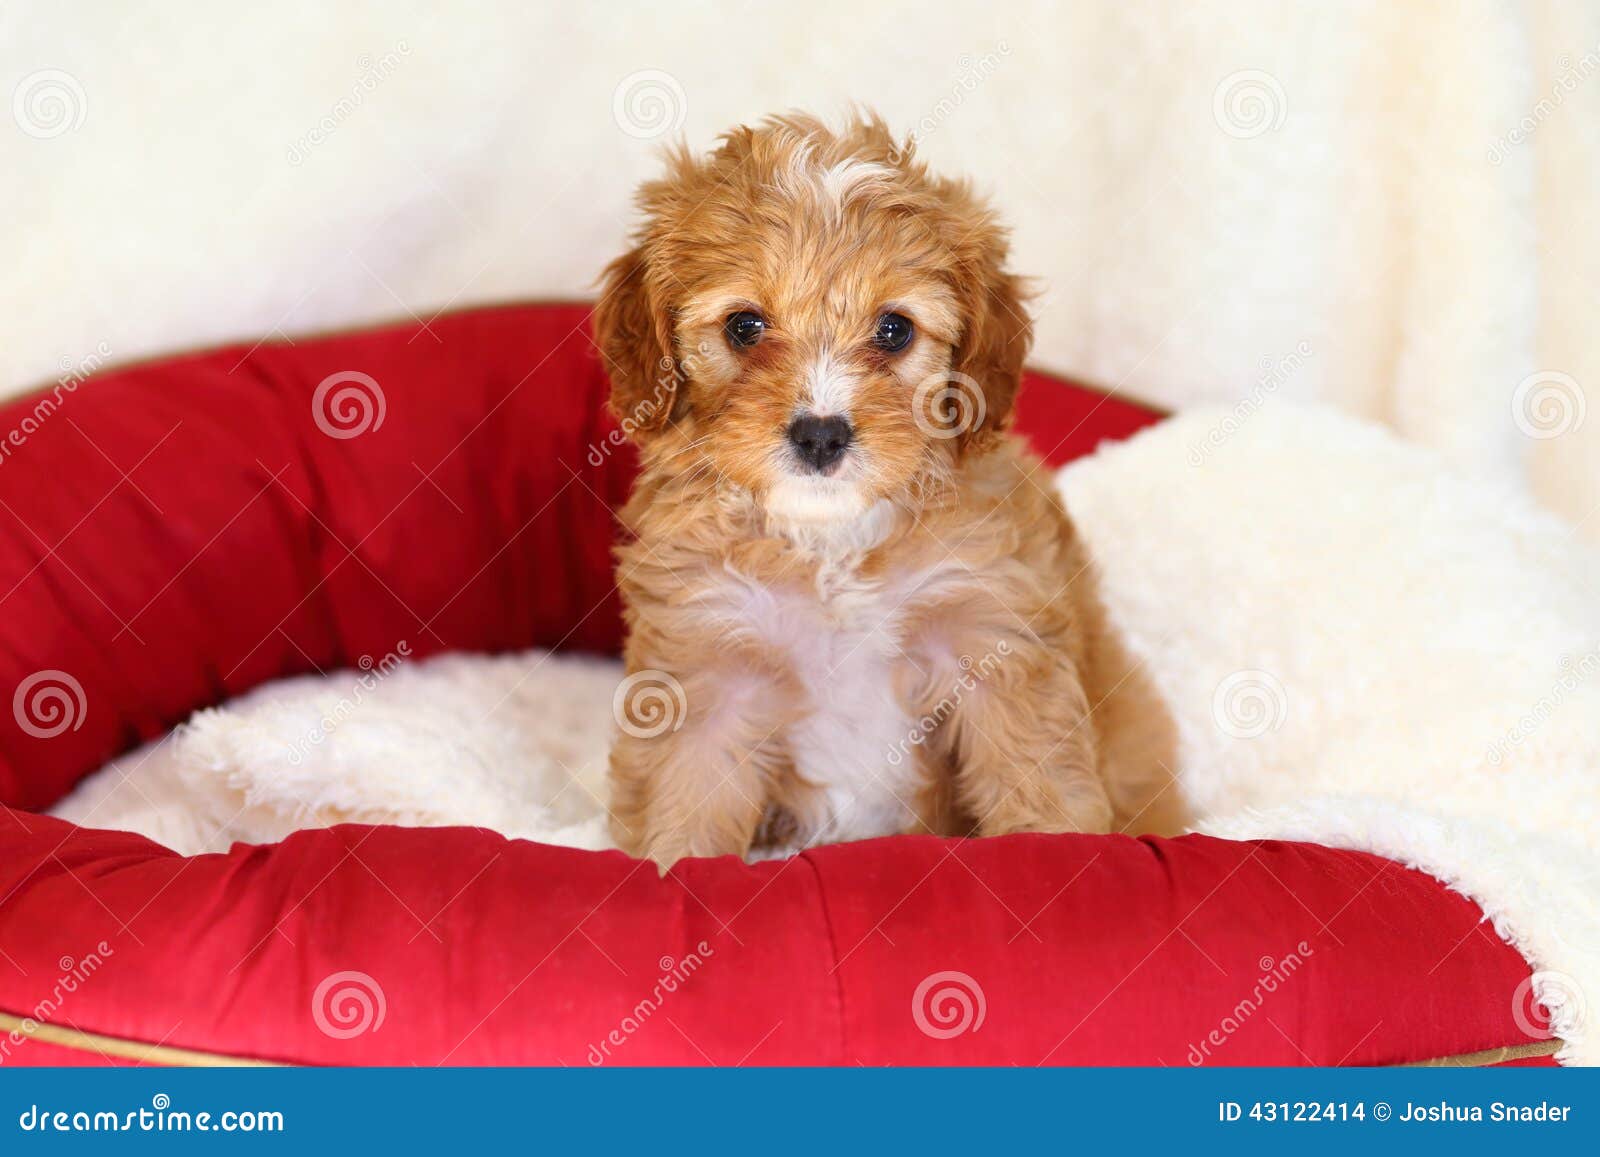 poodle mix puppy sits on a doggy bed